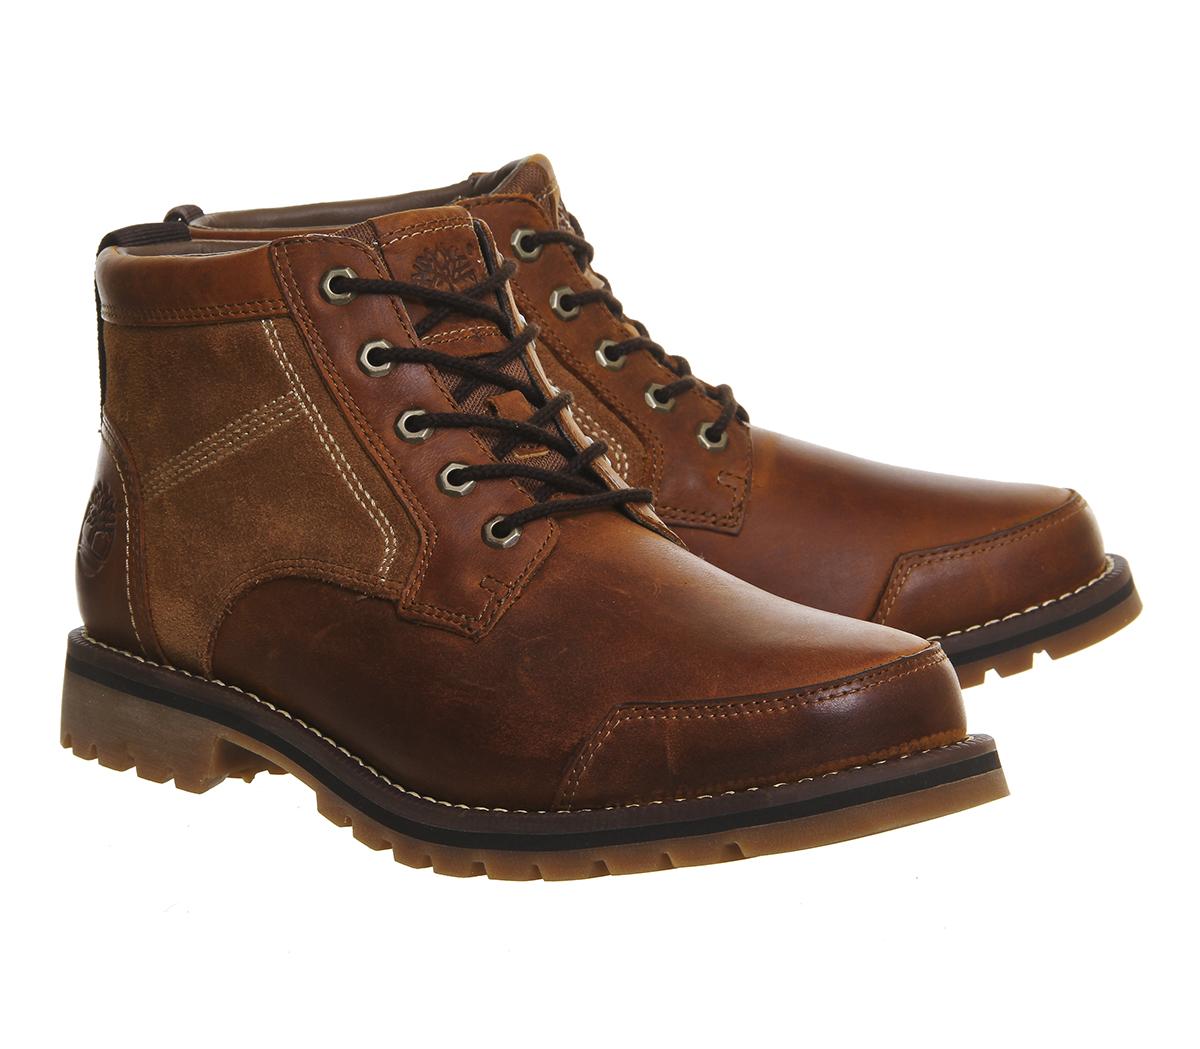 Timberland Suede Larchmont Chukka Boots in Brown for Men - Lyst